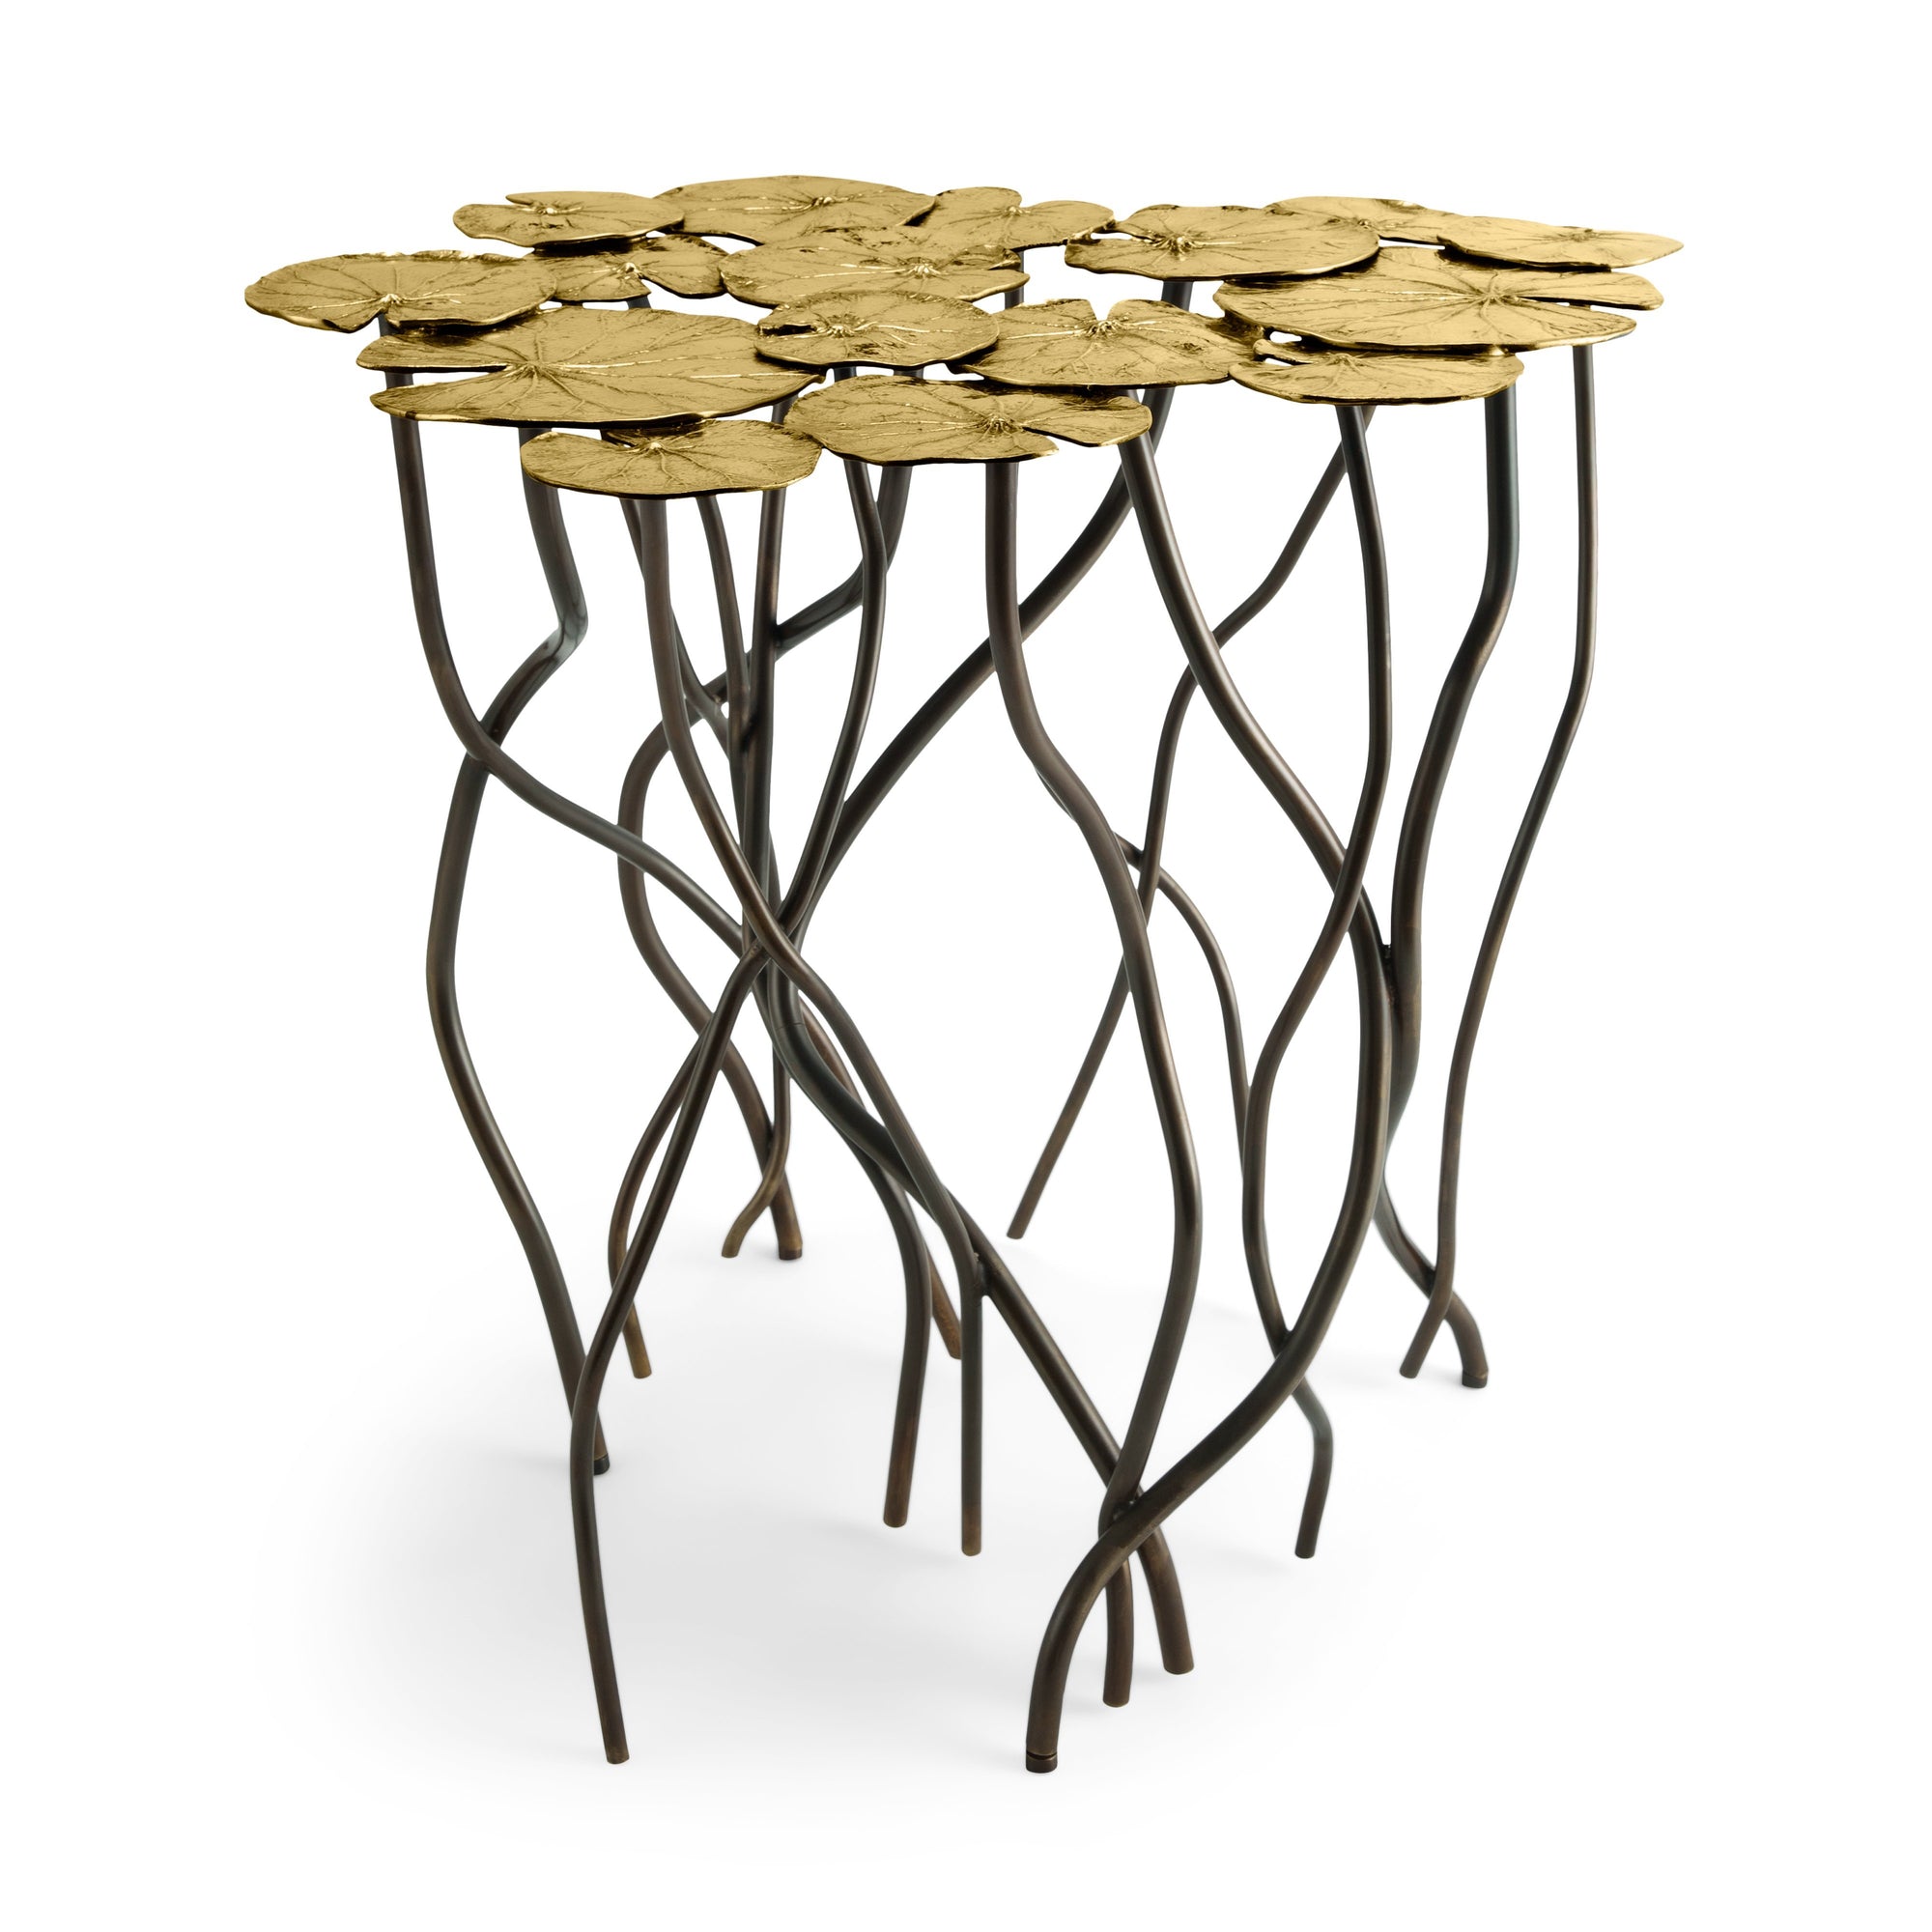 Michael Aram Gold Lily Pad Accent Table